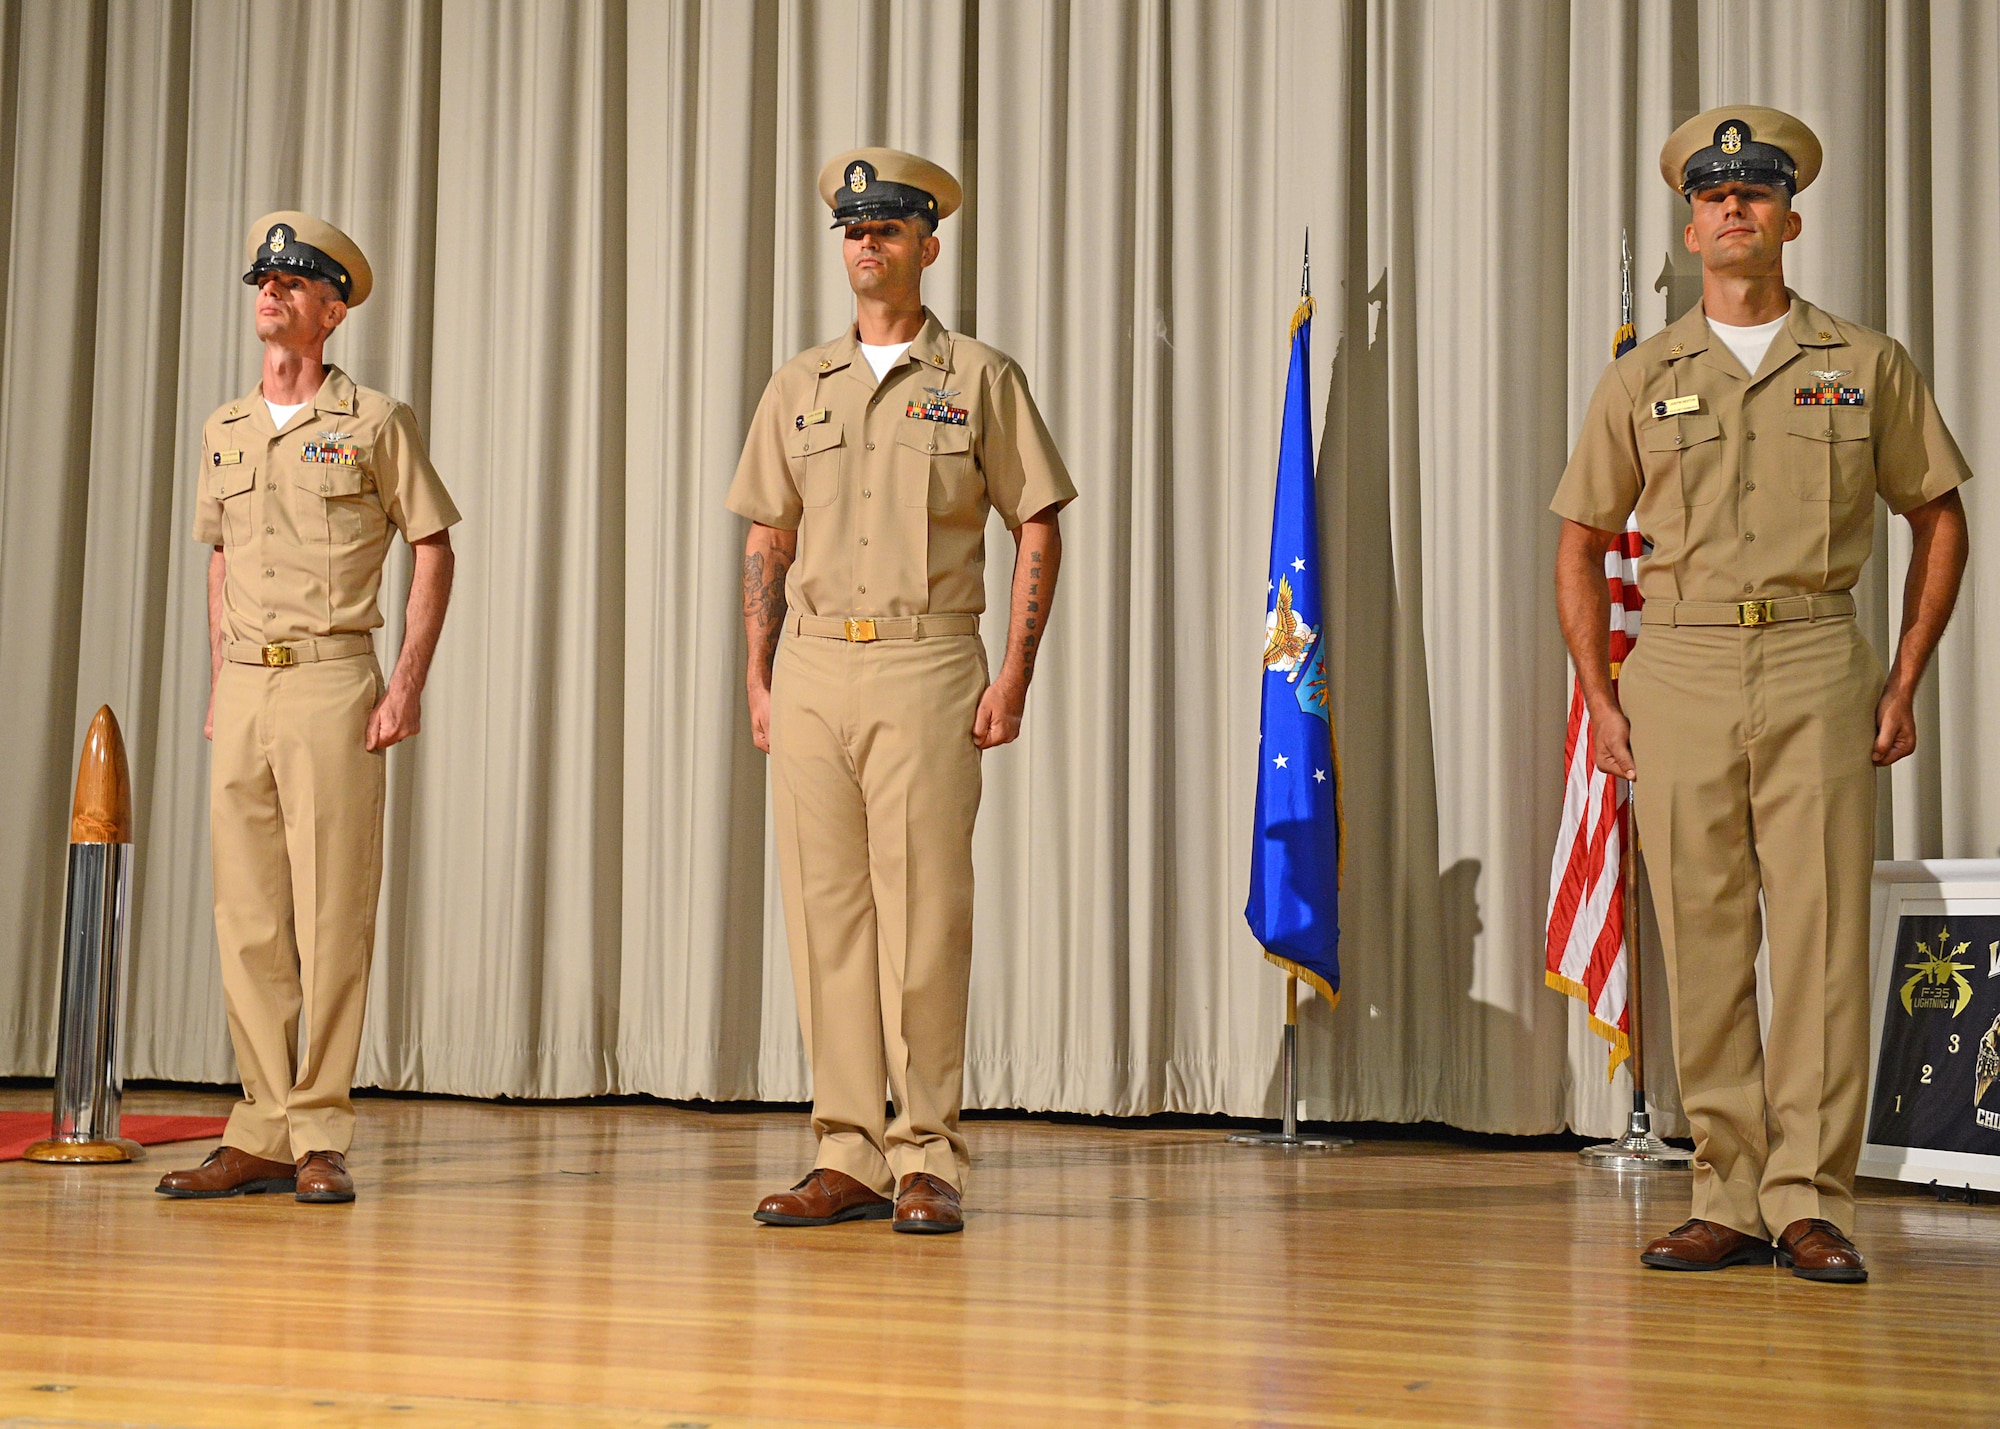 From left to right: Chief Petty Officers Richard Crapser, Lawrence Borba and Justin Sexton don their new khaki uniforms and CPO combination covers after pinning on their anchors to officially become U.S. Navy CPOs at the base theater Sept. 16. Almost 5,000 Sailors across the Navy pinned on the rank of CPO last Friday. (U.S. Air Force photo by Kenji Thuloweit)